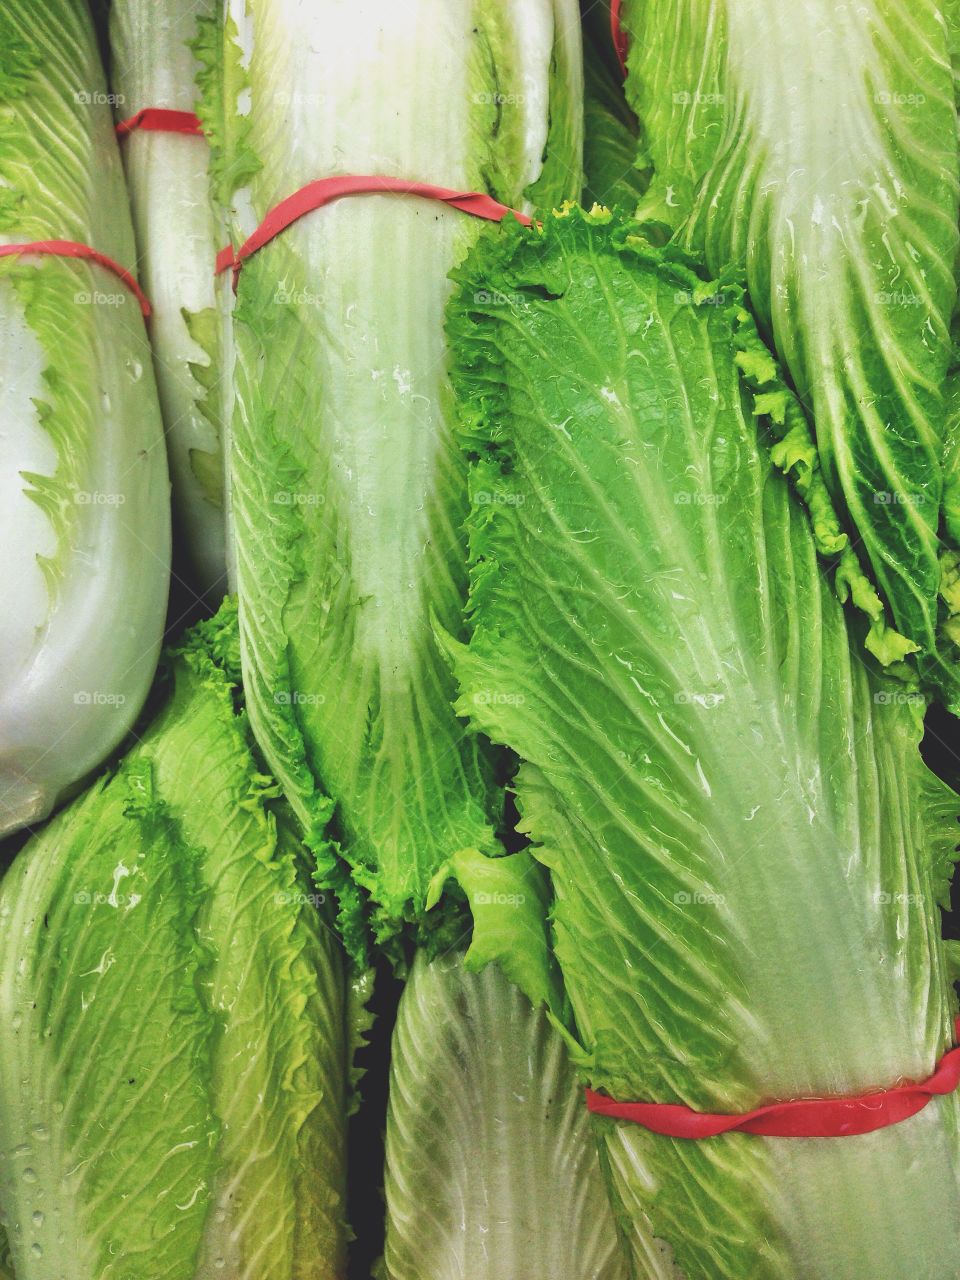 Romaine lettuce . Bunches of Romaine lettuce at the supermarket.